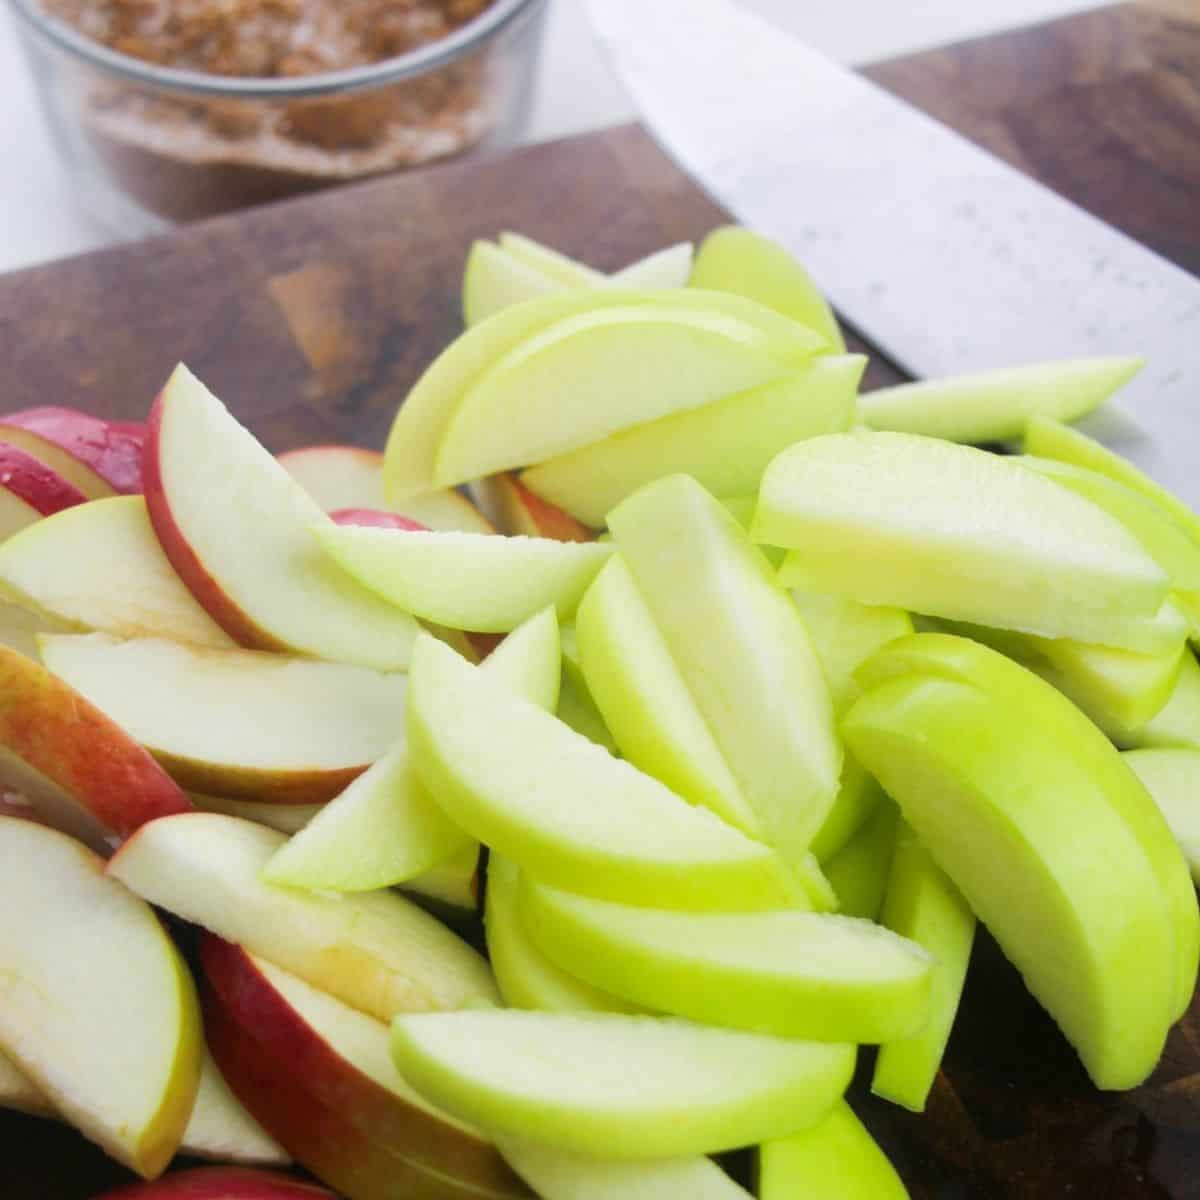 Sliced apples in a pan being fried in butter.